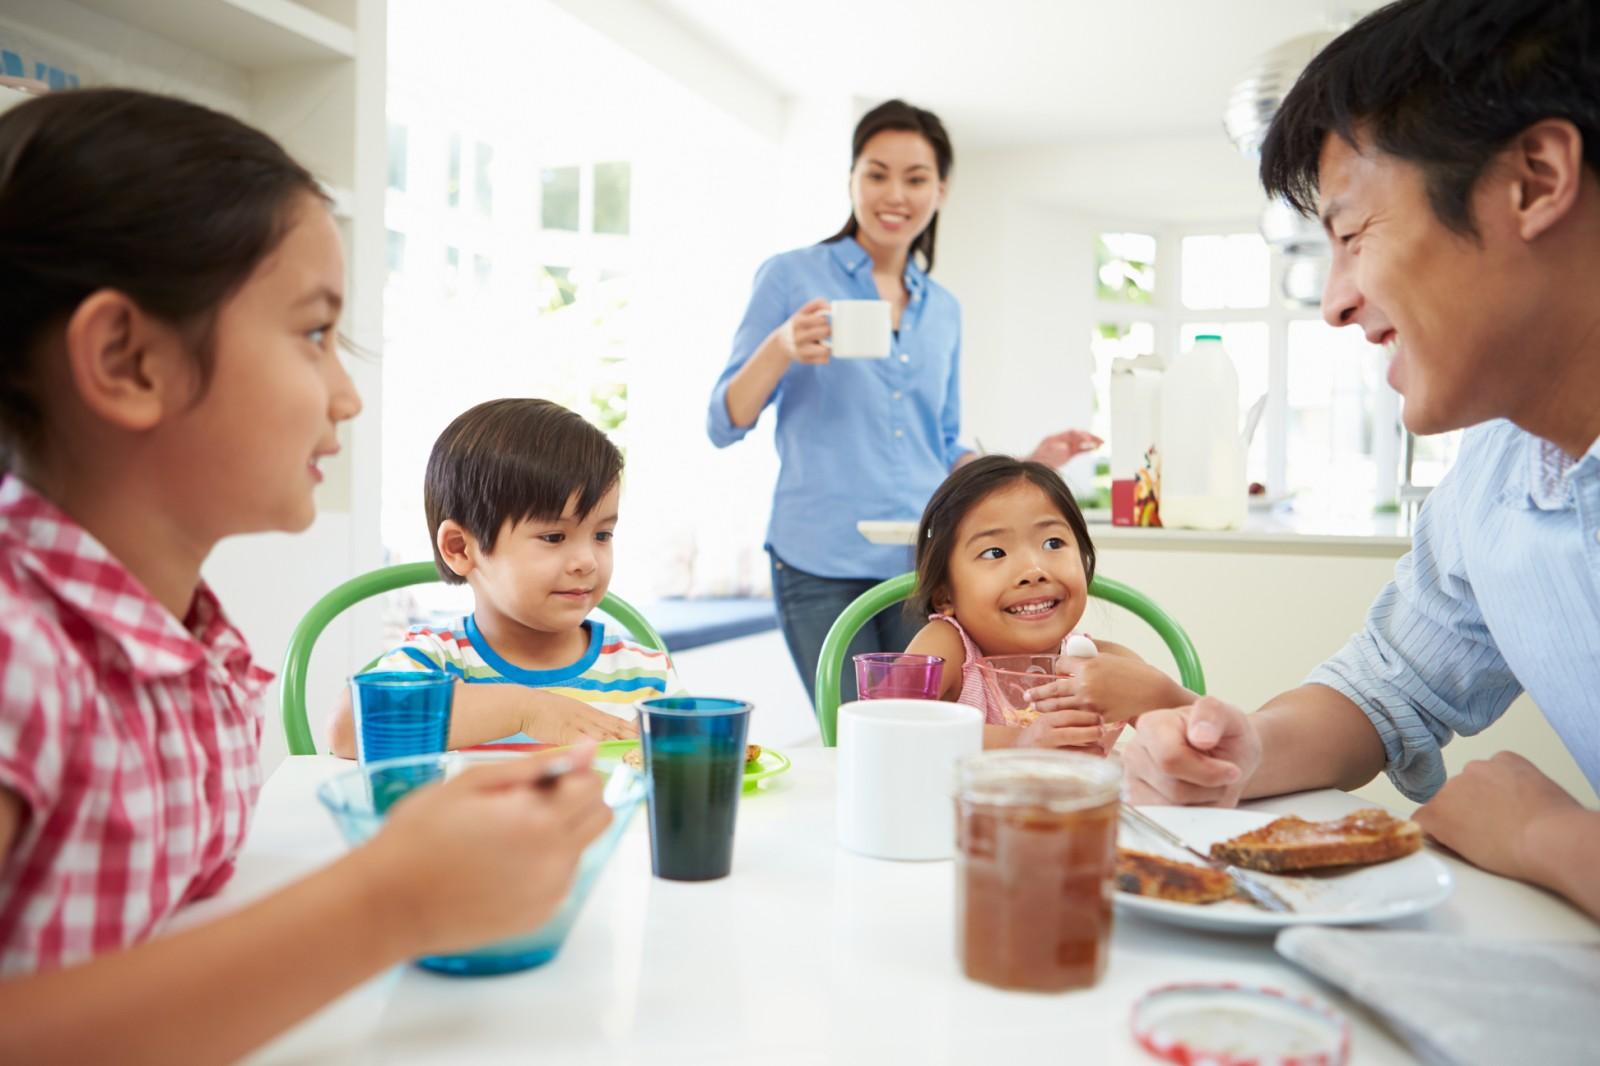 Let us bring back these traditional Filipino mealtime habits